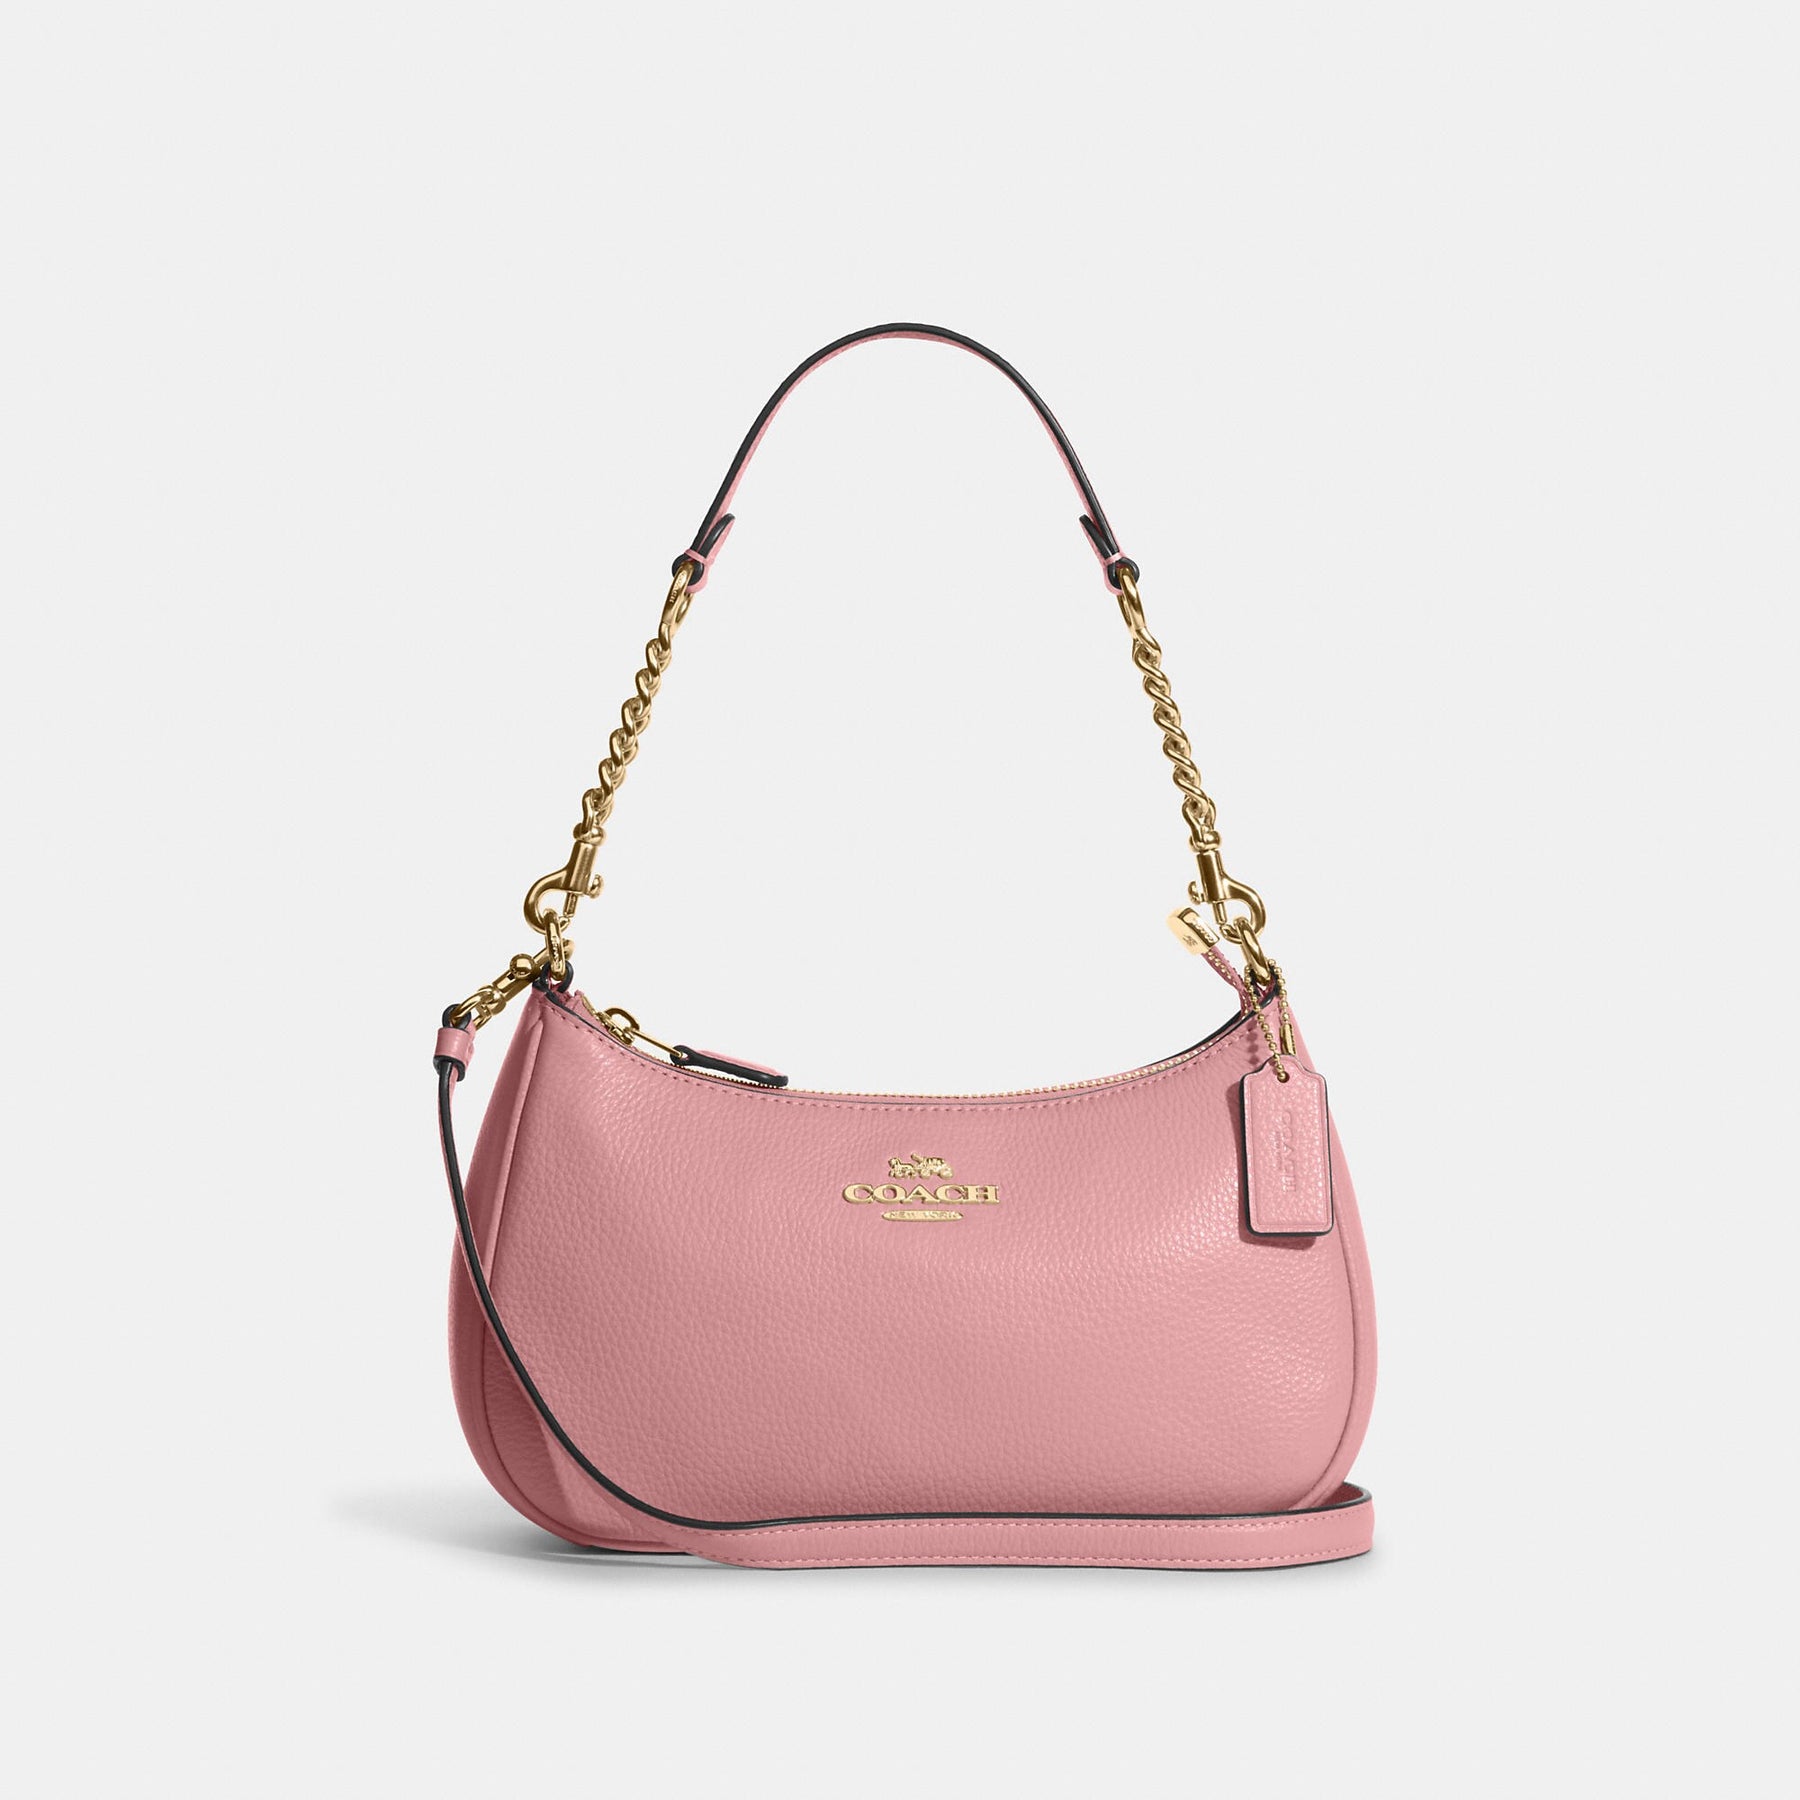 Cyber Monday 2020: This sale is your excuse for a Coach Outlet bag